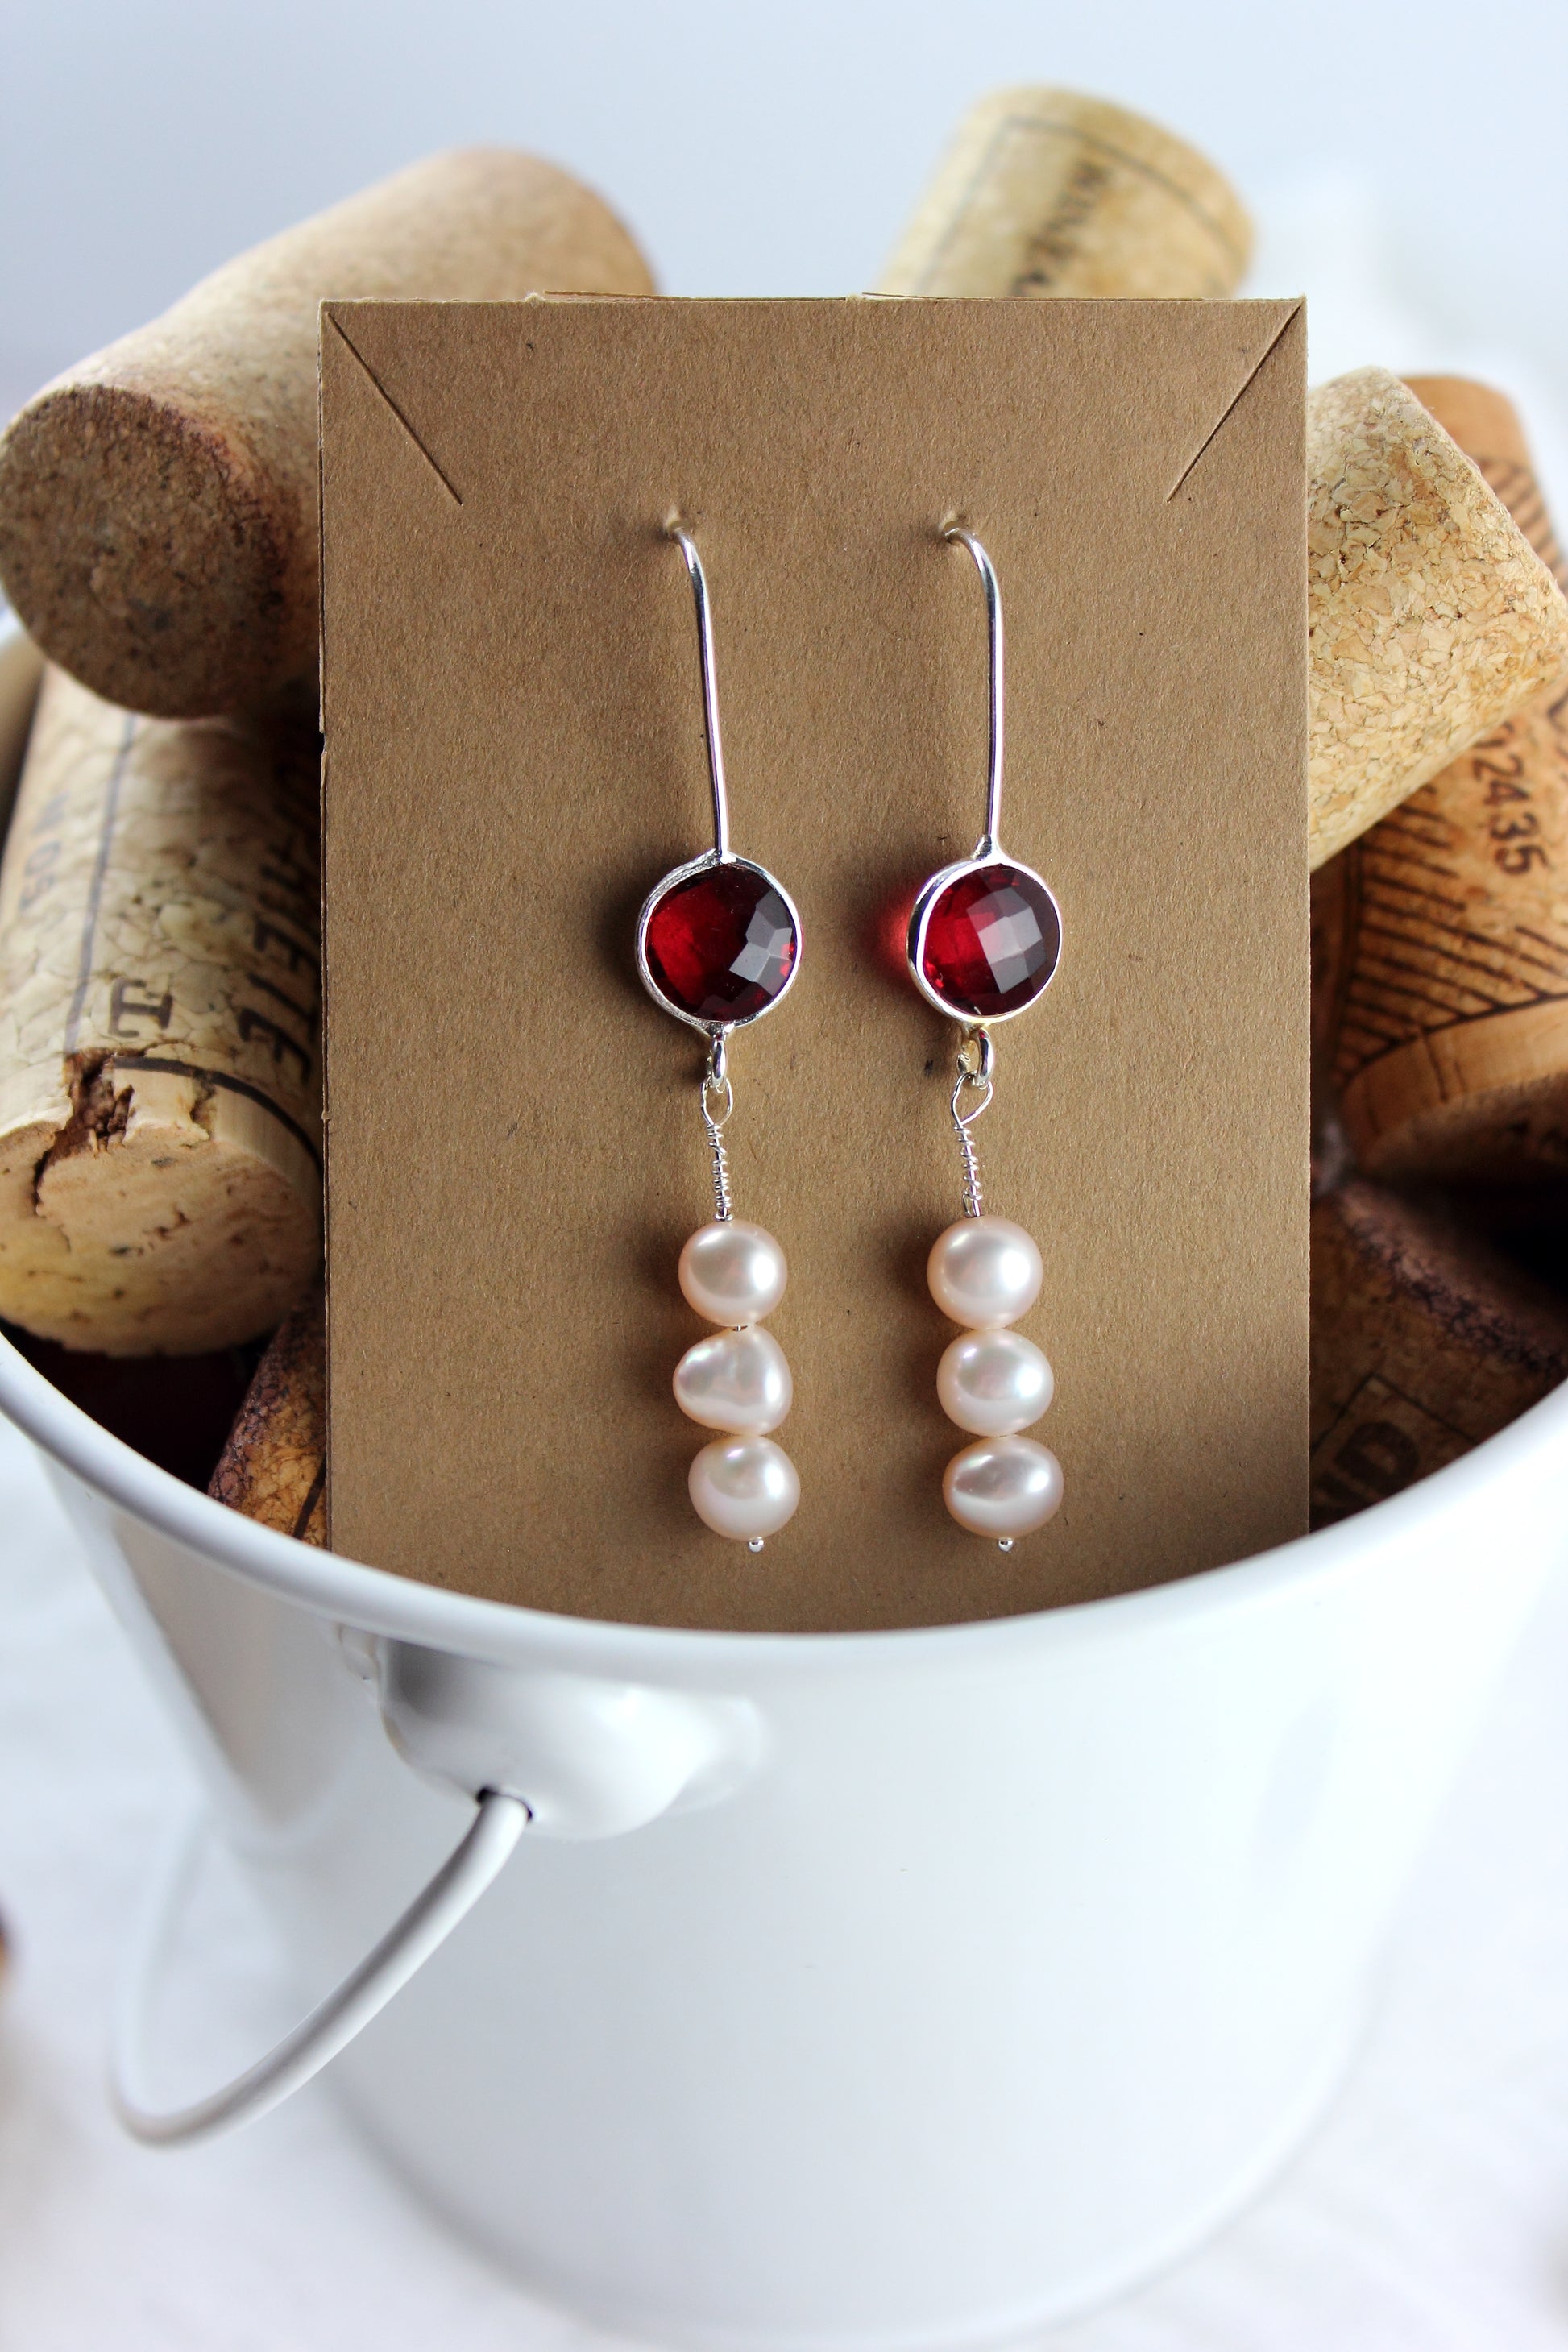 Pink tourmaline and pink pearl earrings